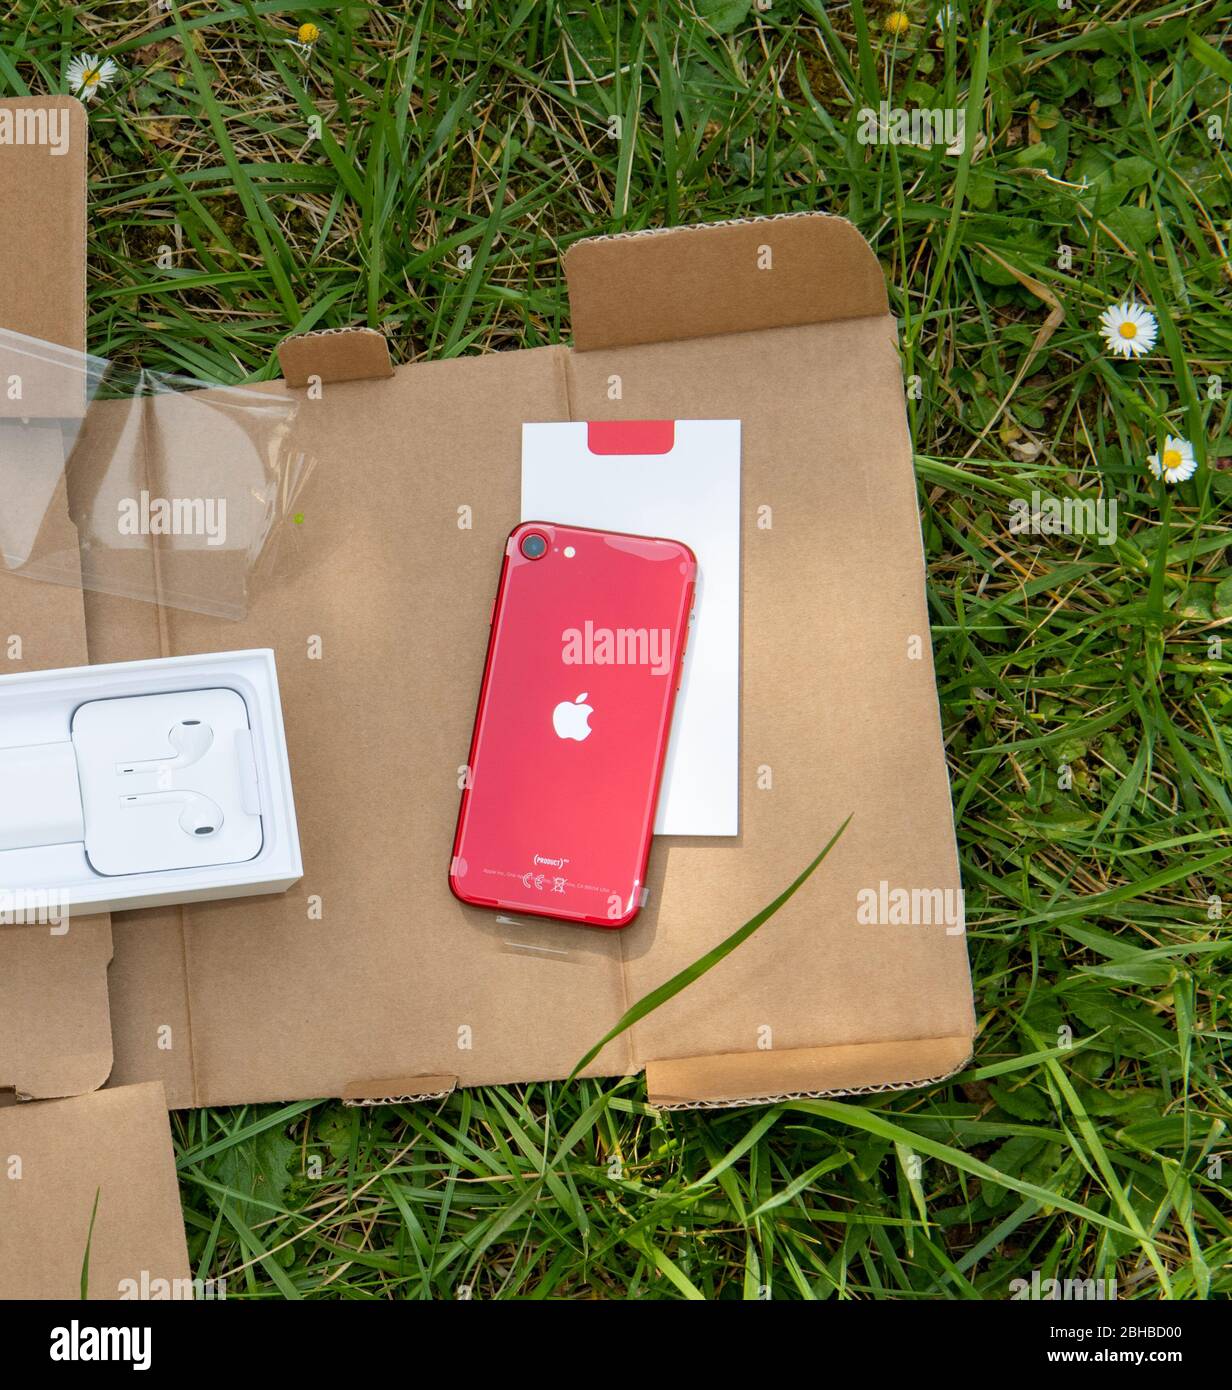 Paris, France - Apr 24, 2020: Parcel with new budget Red iPhone SE by Apple Computers touch ID, Single-lens rear camera and iPhone 8 design with internals from 11 Pro version Stock Photo